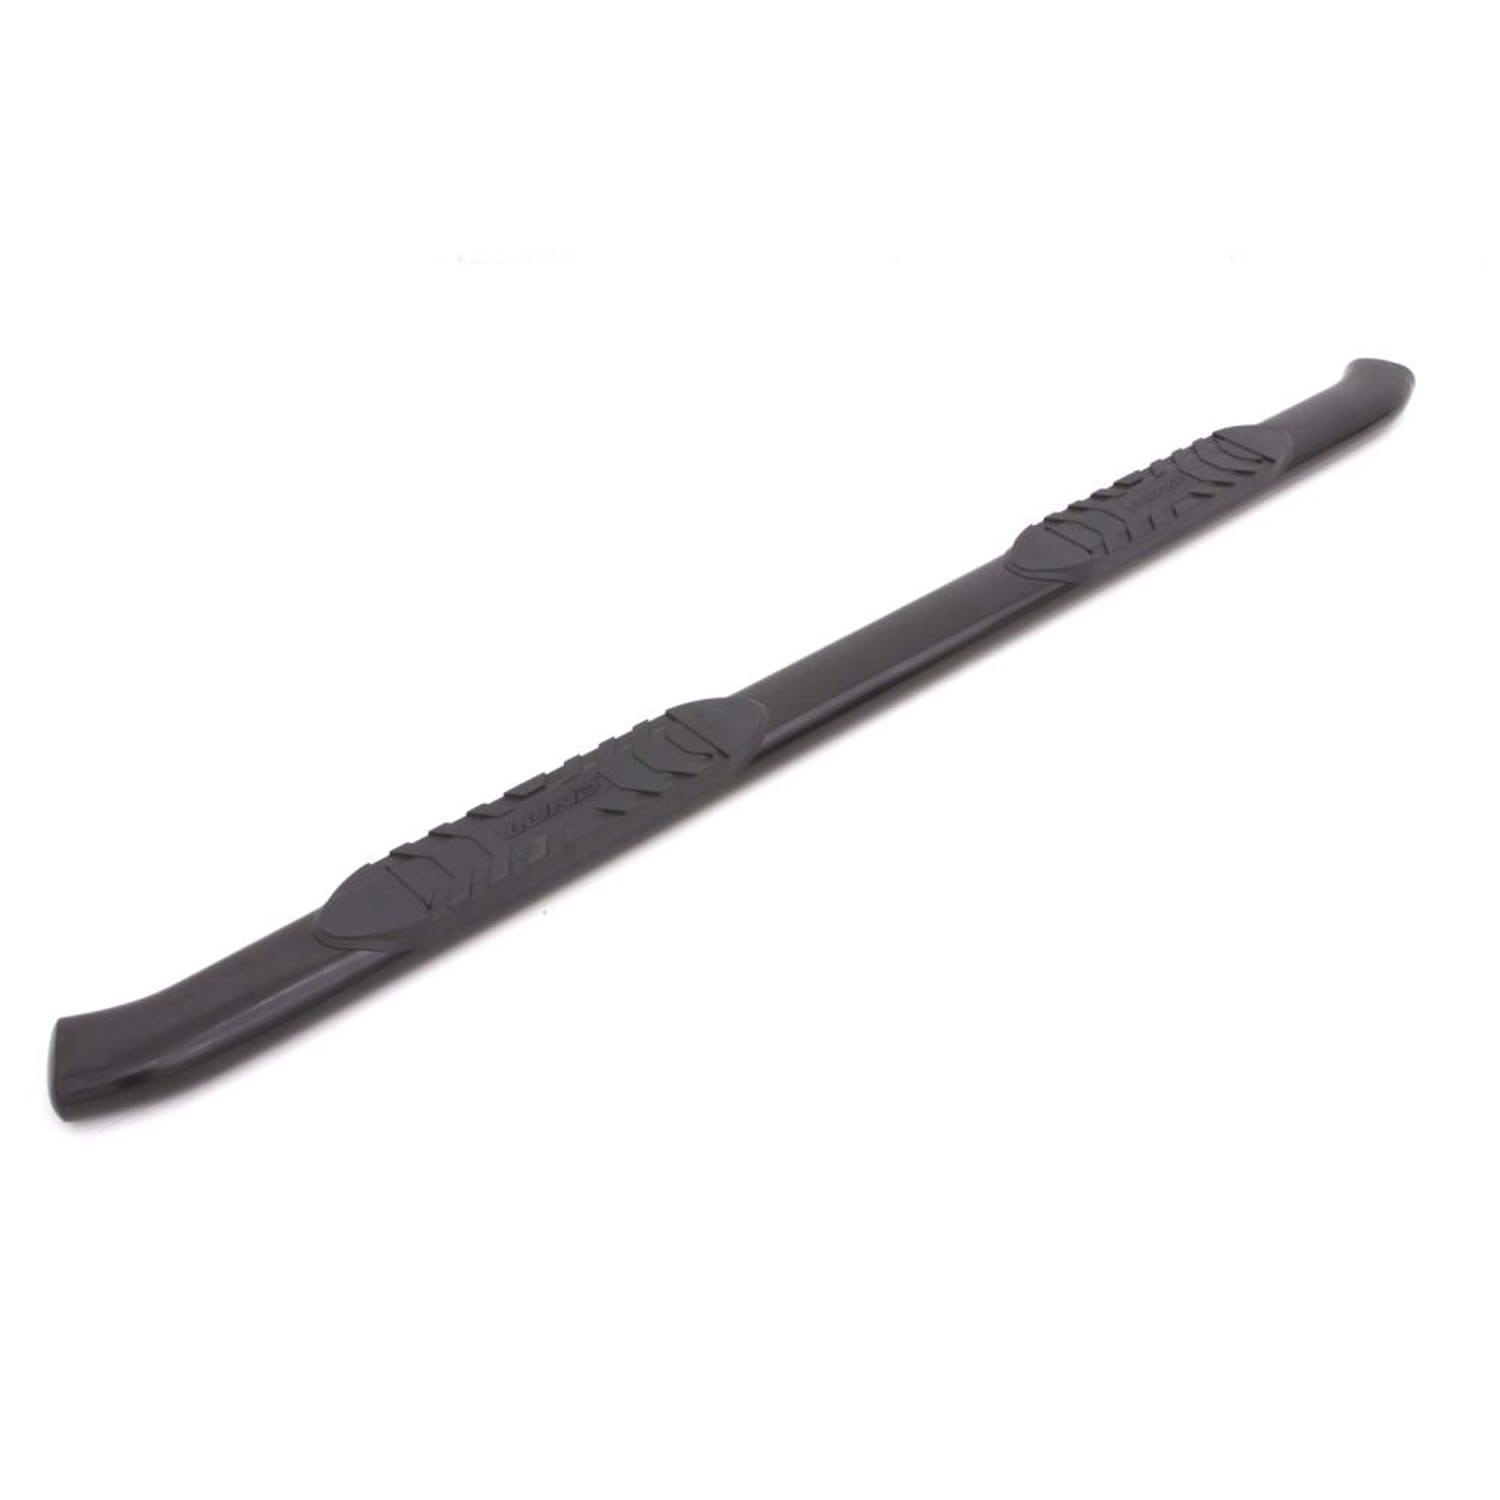 LUND 24276749 5 Inch Oval Curved Nerf Bar - Black LUND -5 inch CURVED OVAL BLACK SS